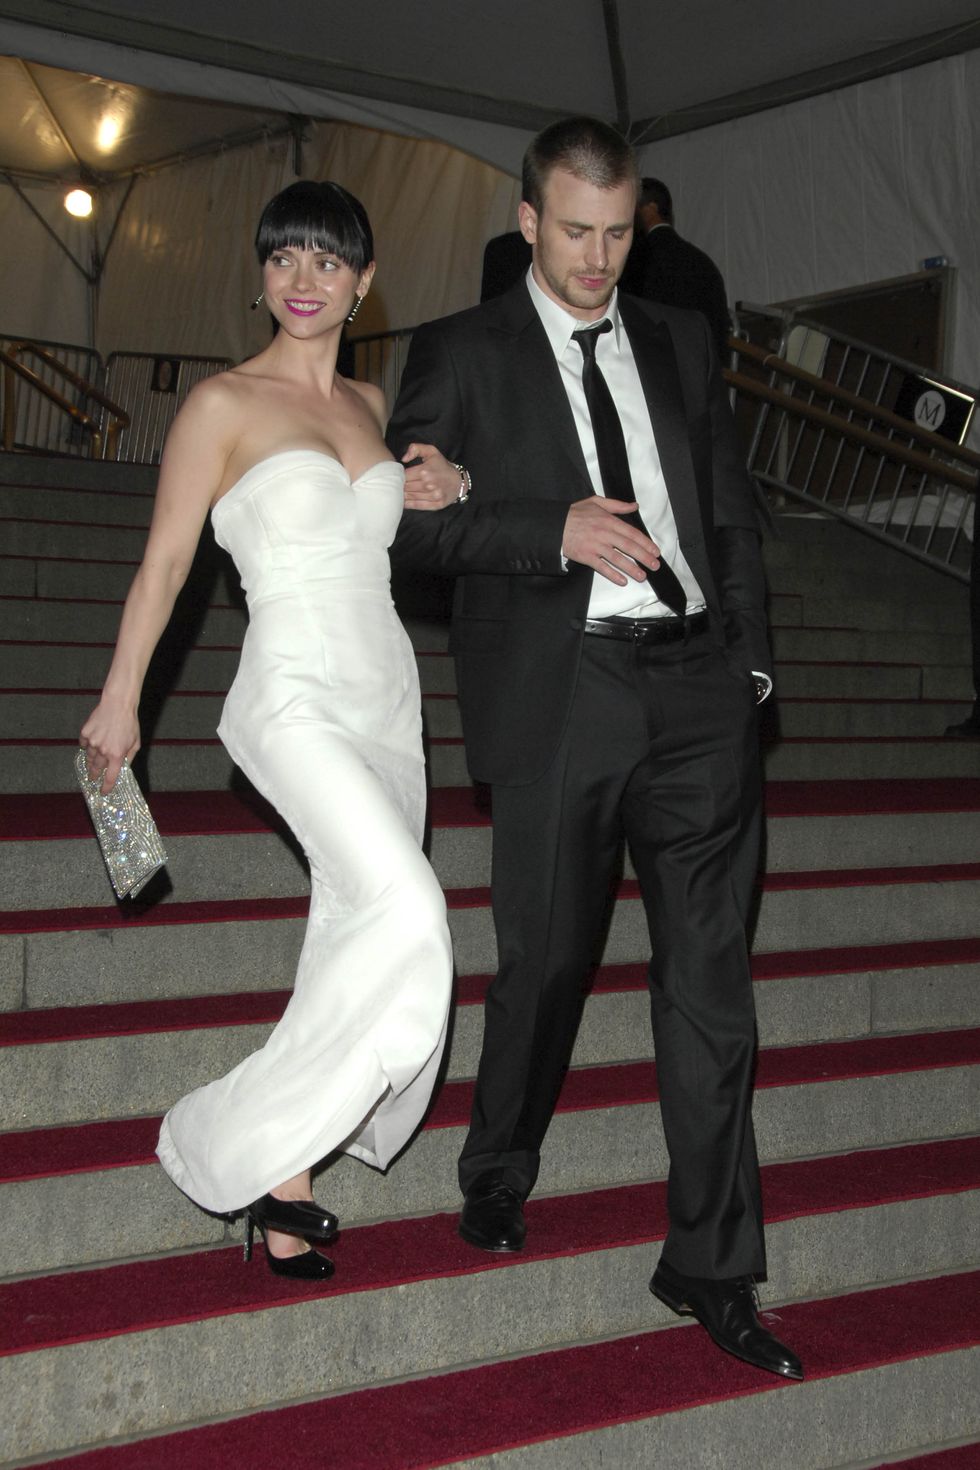 new york city, ny   may 7 christina ricci and chris evans attend the costume institute gala in honor of poiret king of fashion at the metropolitan museum of art on may 7, 2007 in new york city photo by chance yehpatrick mcmullan via getty images